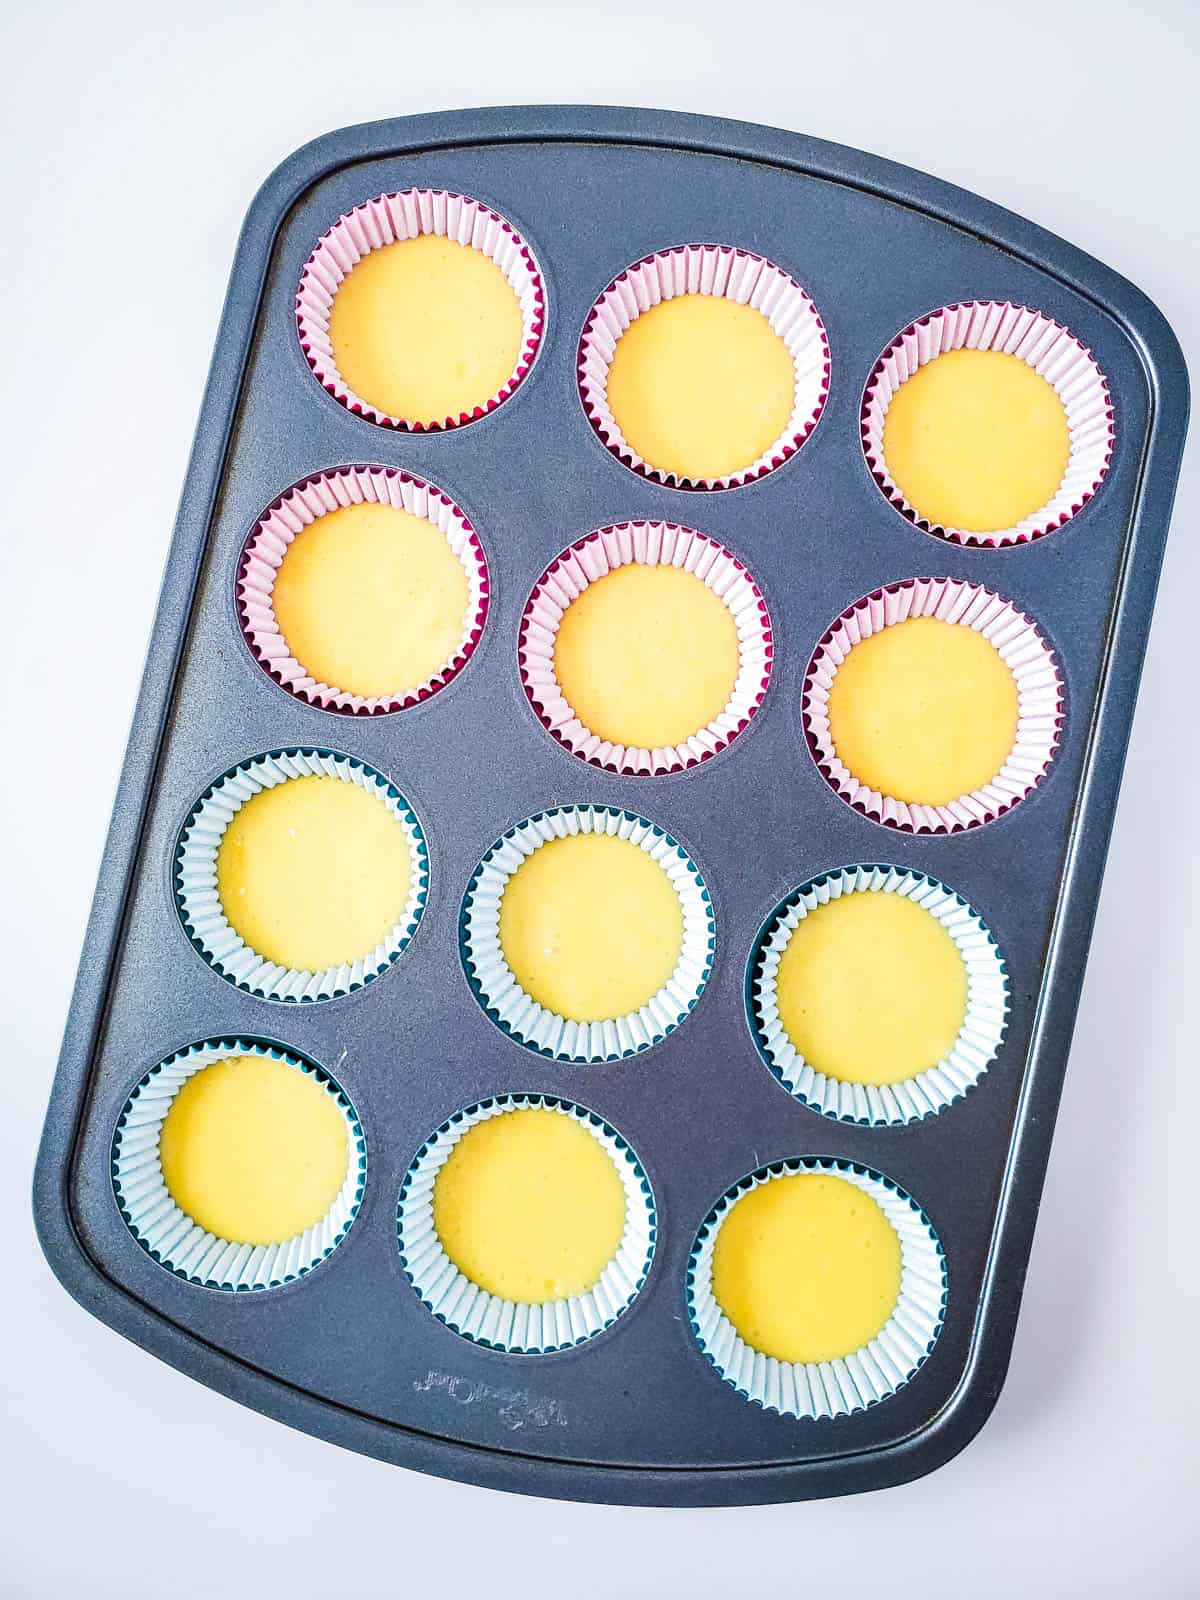 A cupcake tray with liners holding unbaked cupcake batter.